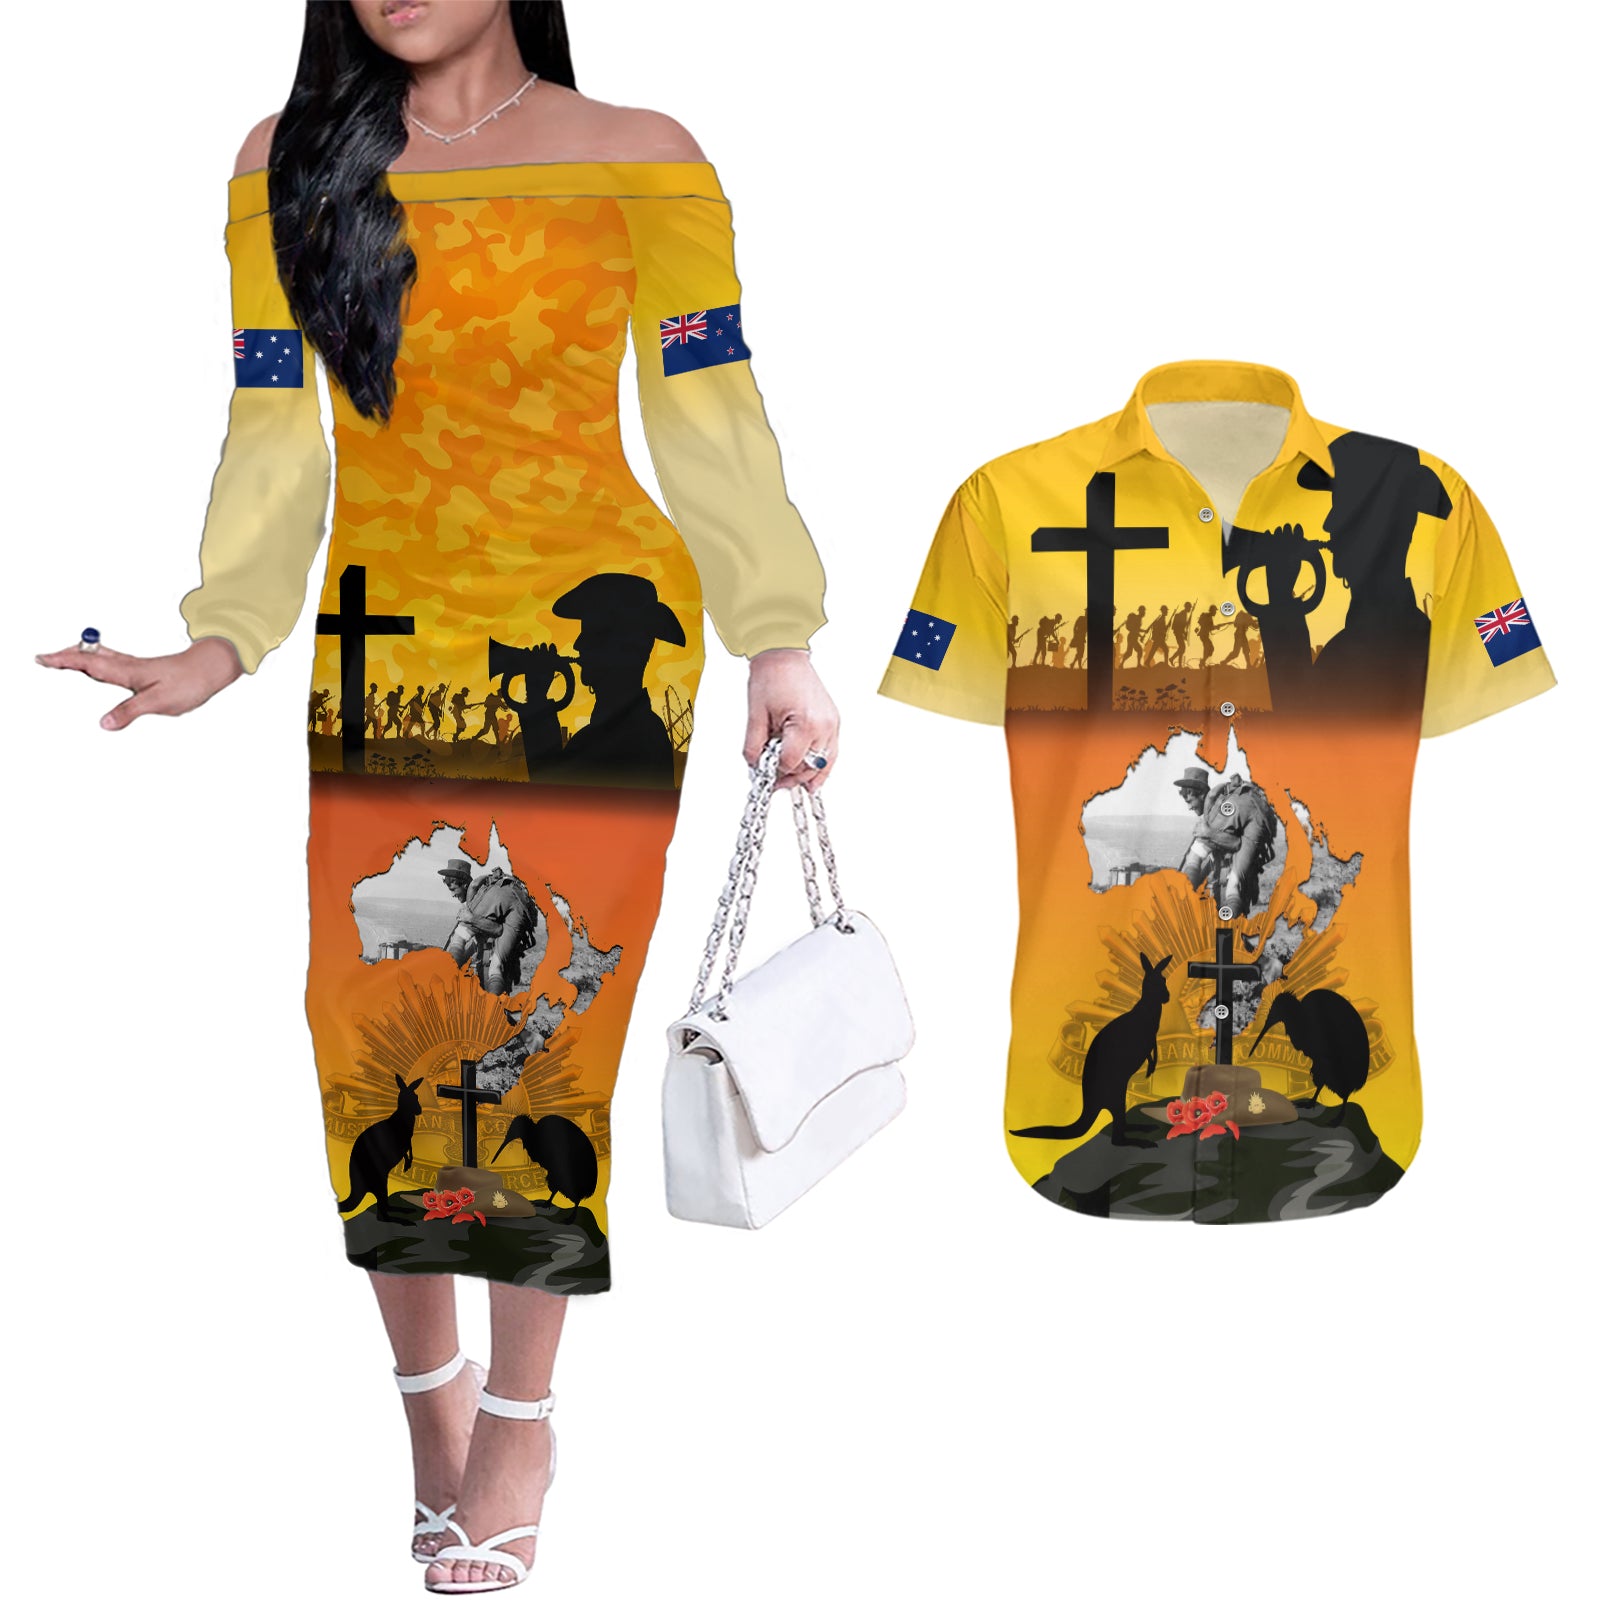 New Zealand and Australia ANZAC Day Couples Matching Off The Shoulder Long Sleeve Dress and Hawaiian Shirt Gallipoli Lest We Forget LT03 Yellow - Polynesian Pride